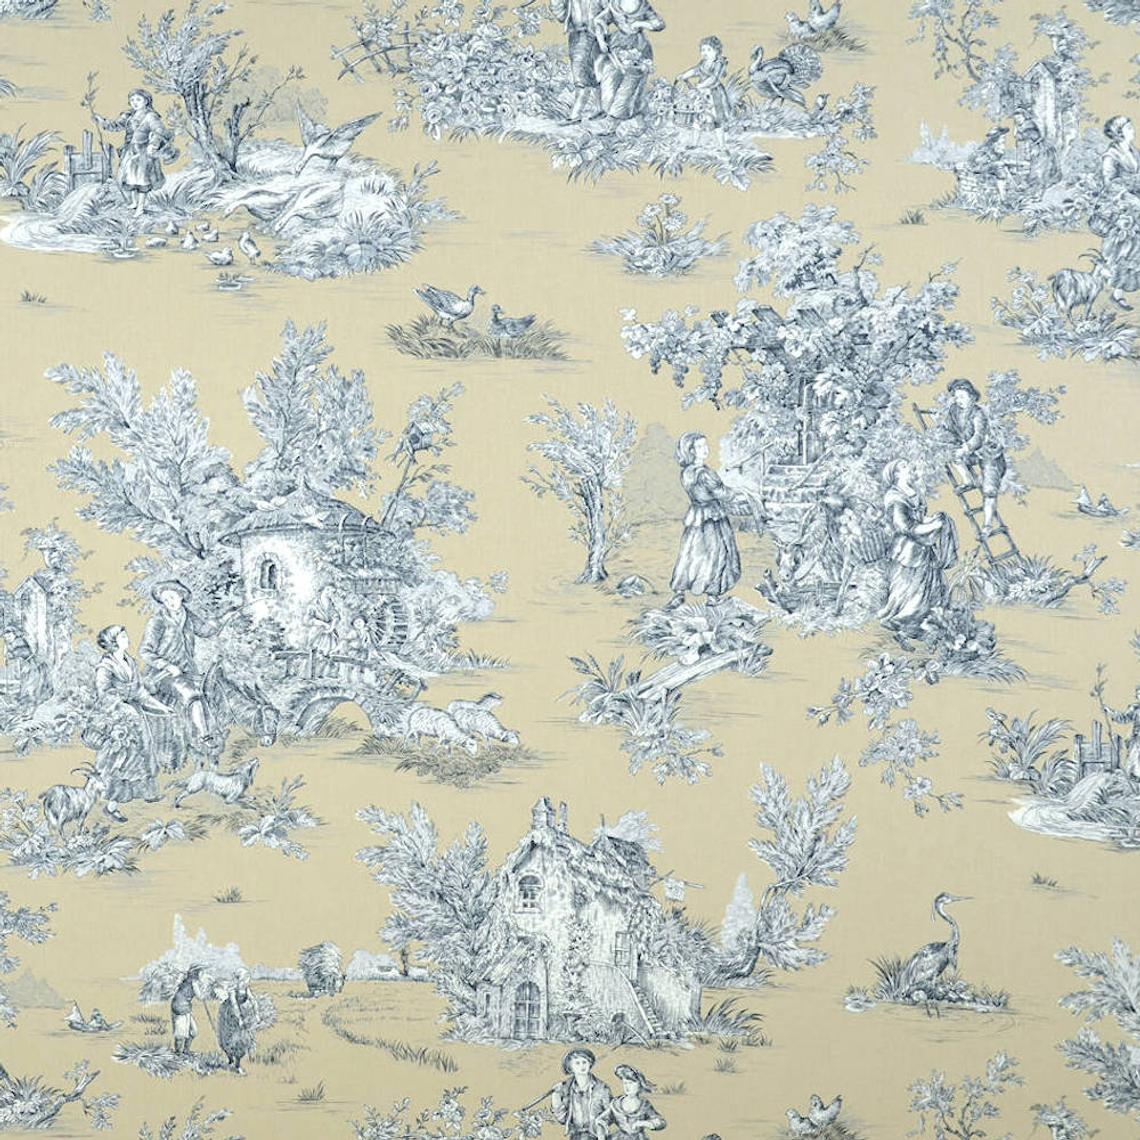 scalloped valance in pastorale #88 blue on beige french country toile